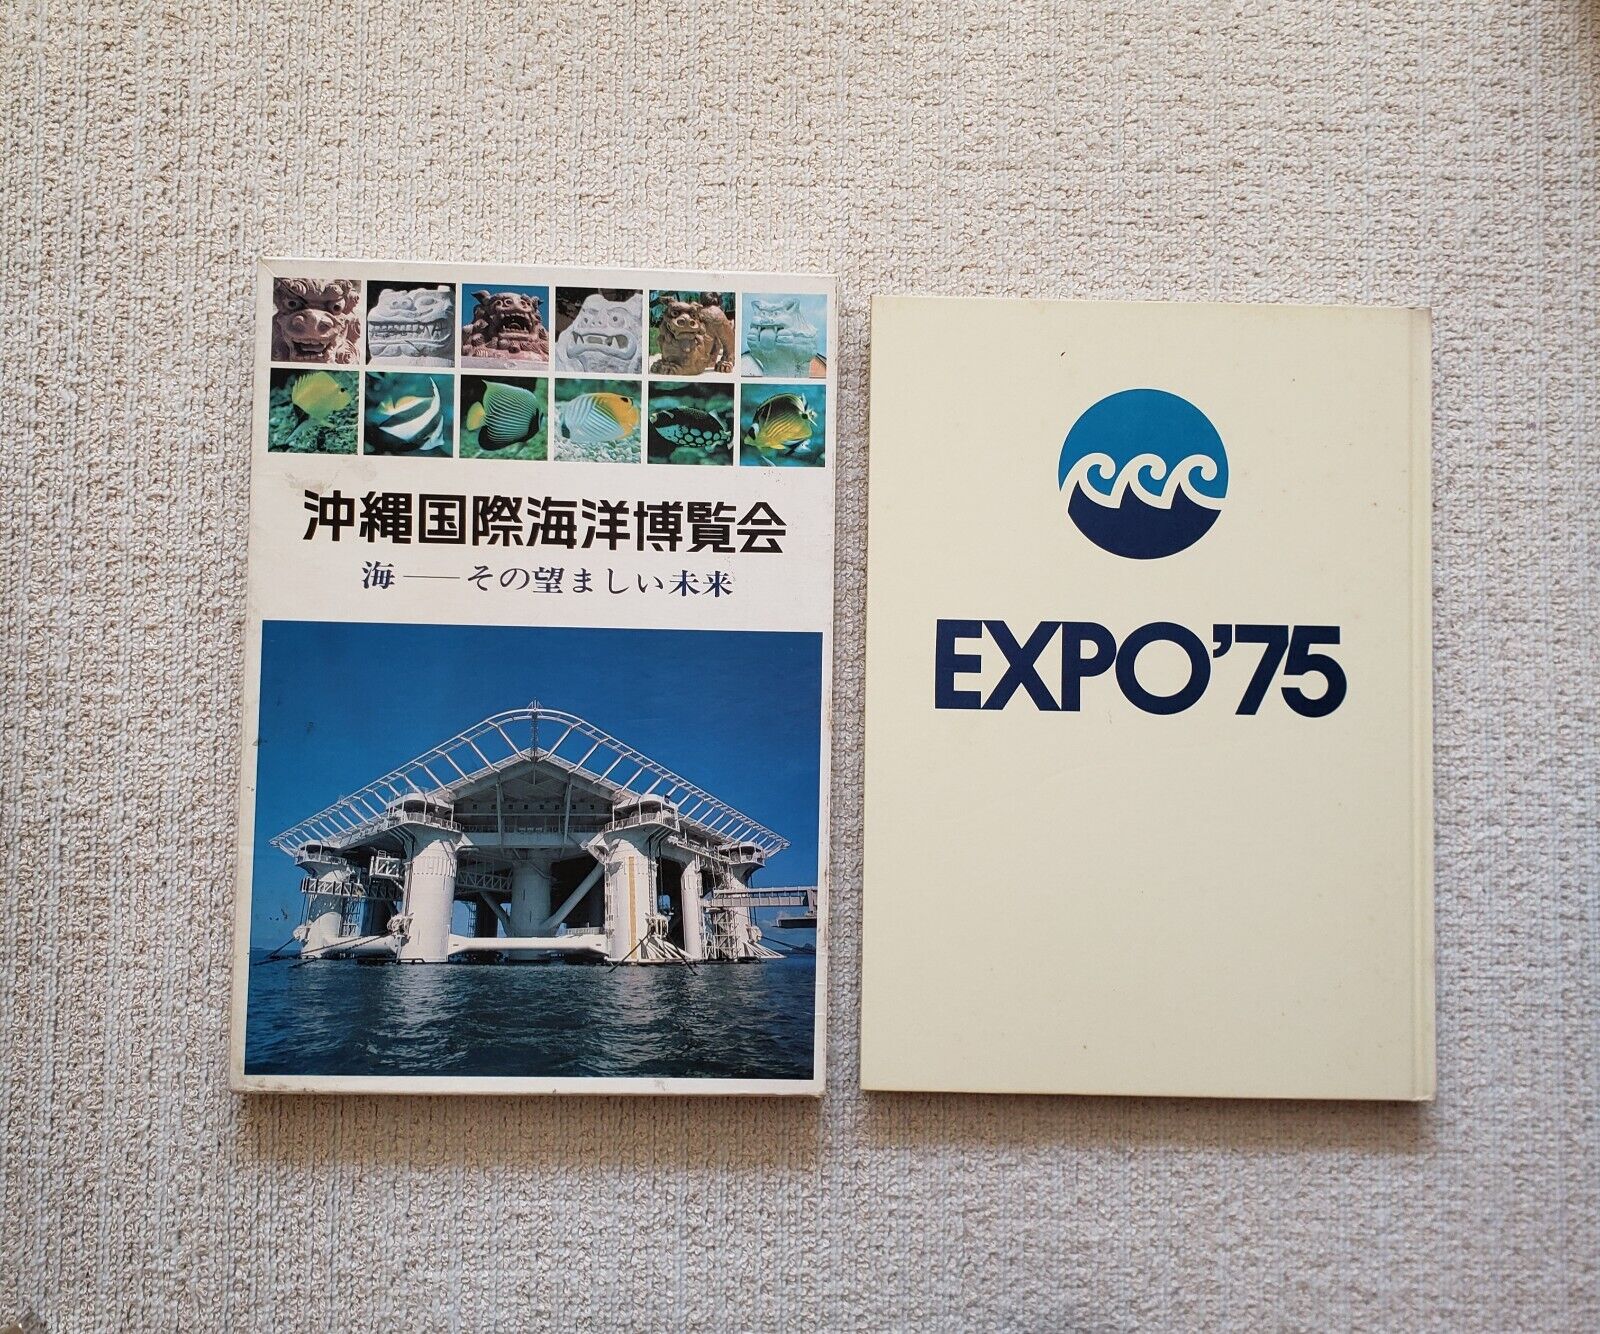 Expo '75 International Ocean Exposition; The Sea We Would Like To See